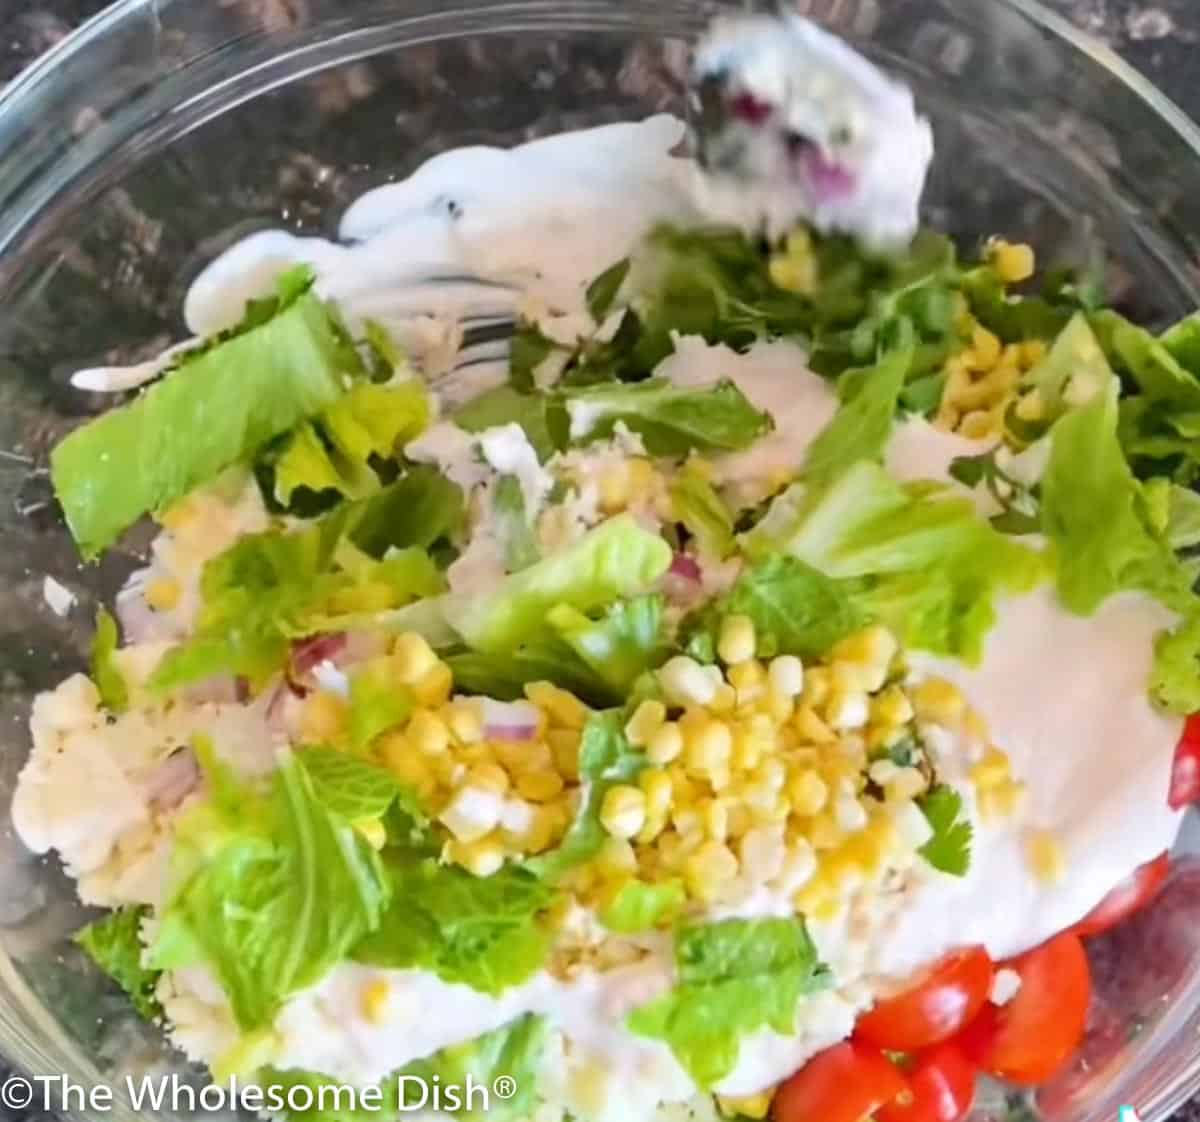 Mixing street corn salad with a creamy dressing.